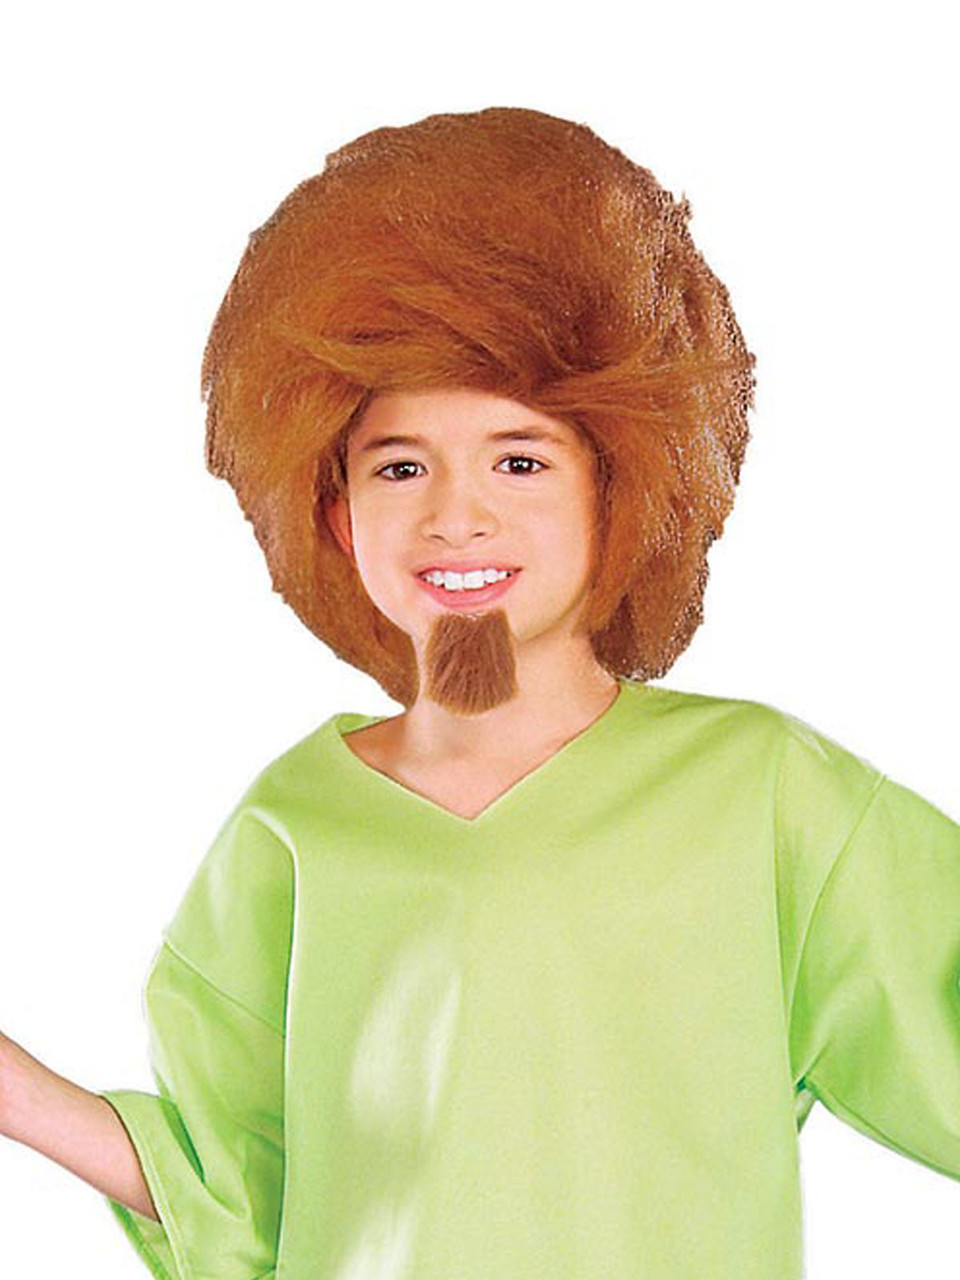 SHAGGY DELUXE COSTUME - SIZE L